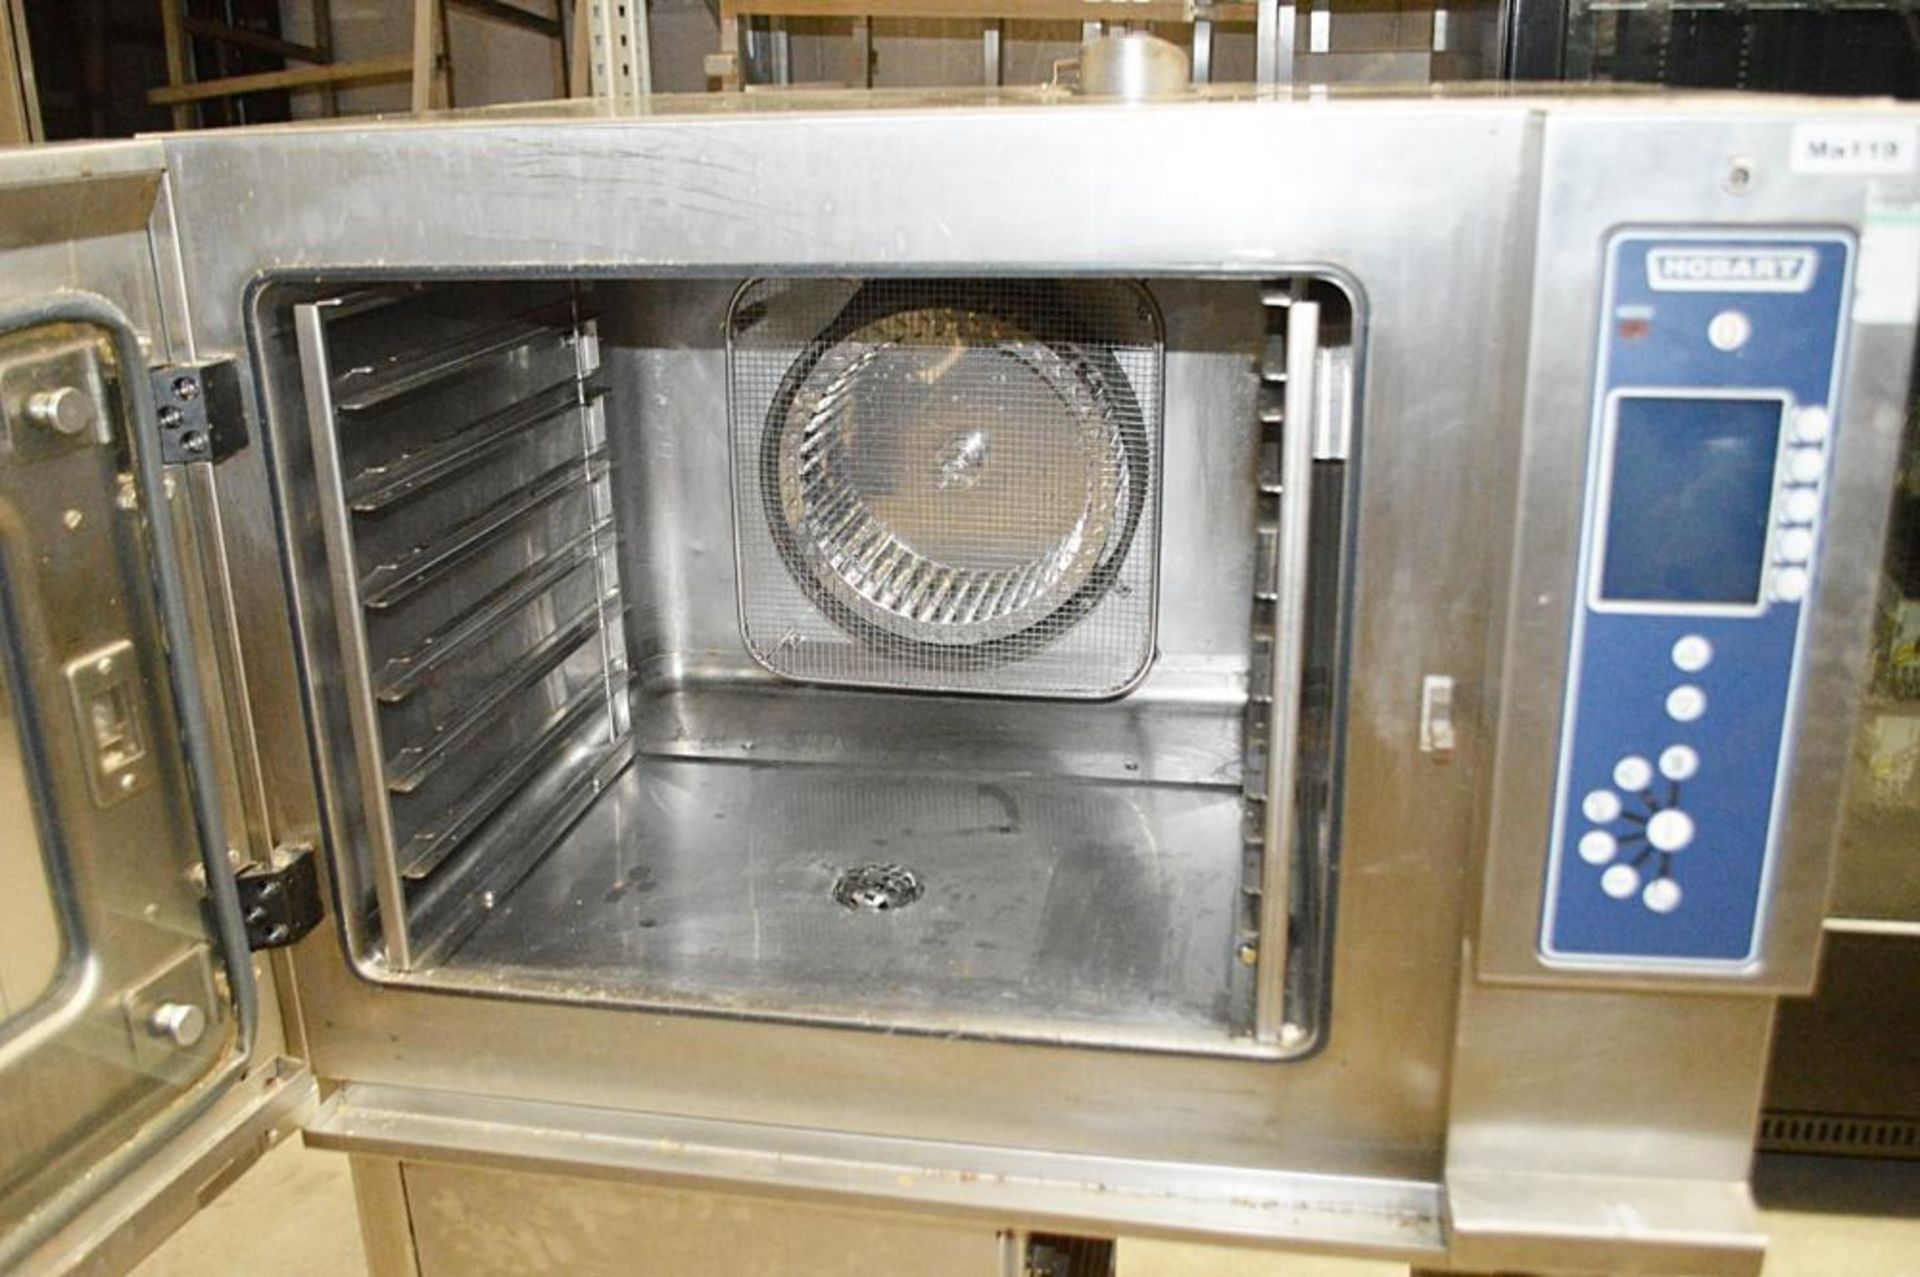 1 x HOBART CSDUC 6-Grid Combi Oven With Stand - 3 phase - Dimensions: H140 x W90 x D90cm - Stainless - Image 11 of 11